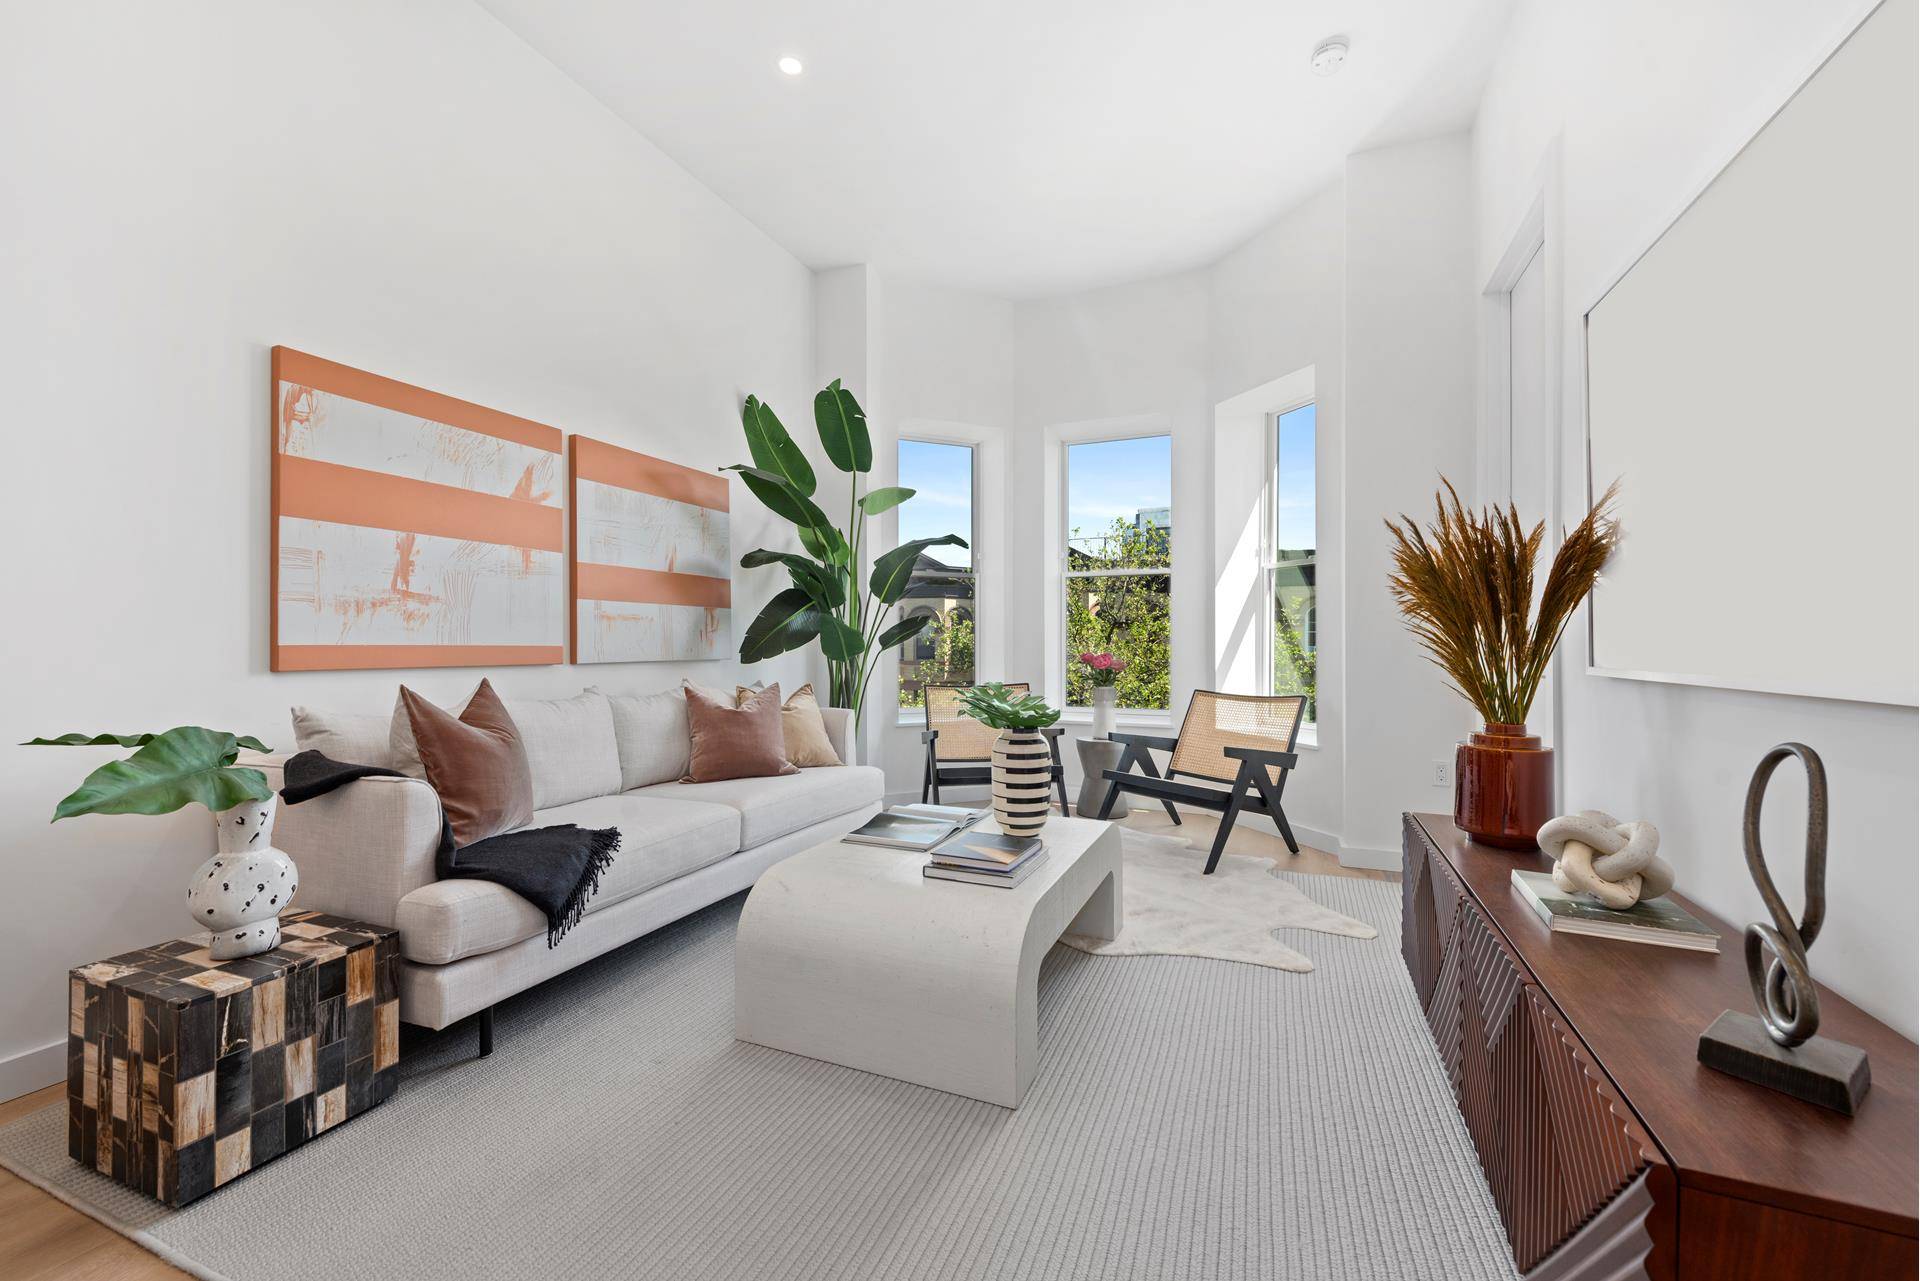 766 Union is a four unit redeveloped boutique condominium in coveted North Park Slope.